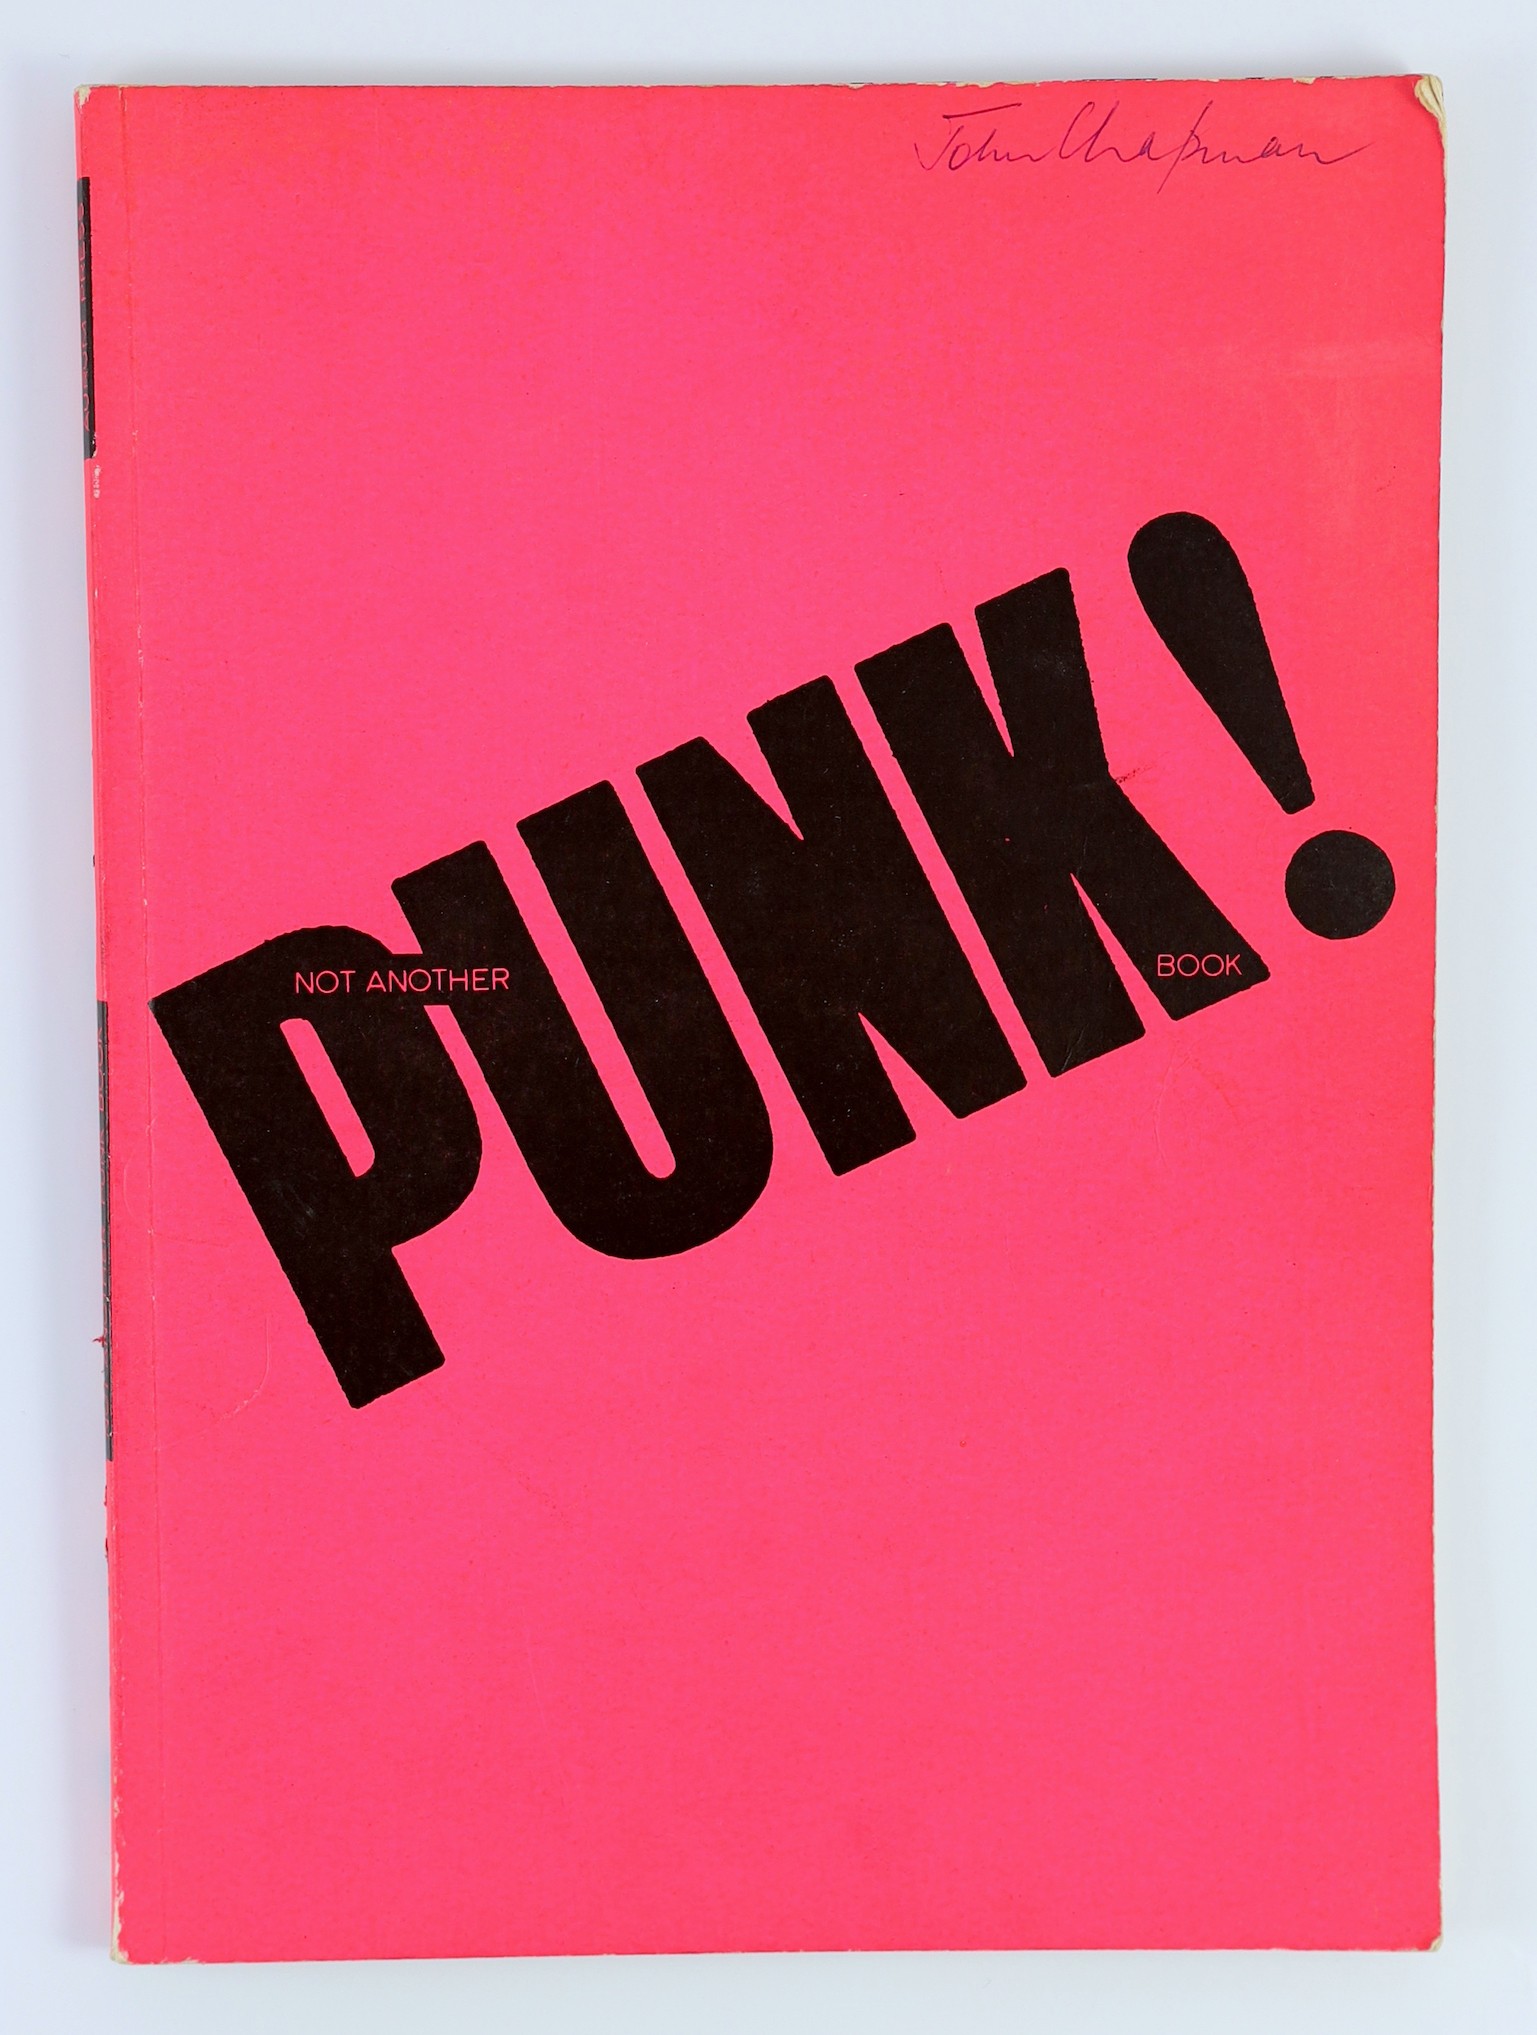 Anscombe, Isabelle - Not Another Punk Book, 1st UK edition, 4to, neon pink paper wraps, biro ownership inscription to top right title page, Aurum Press, London, 1978